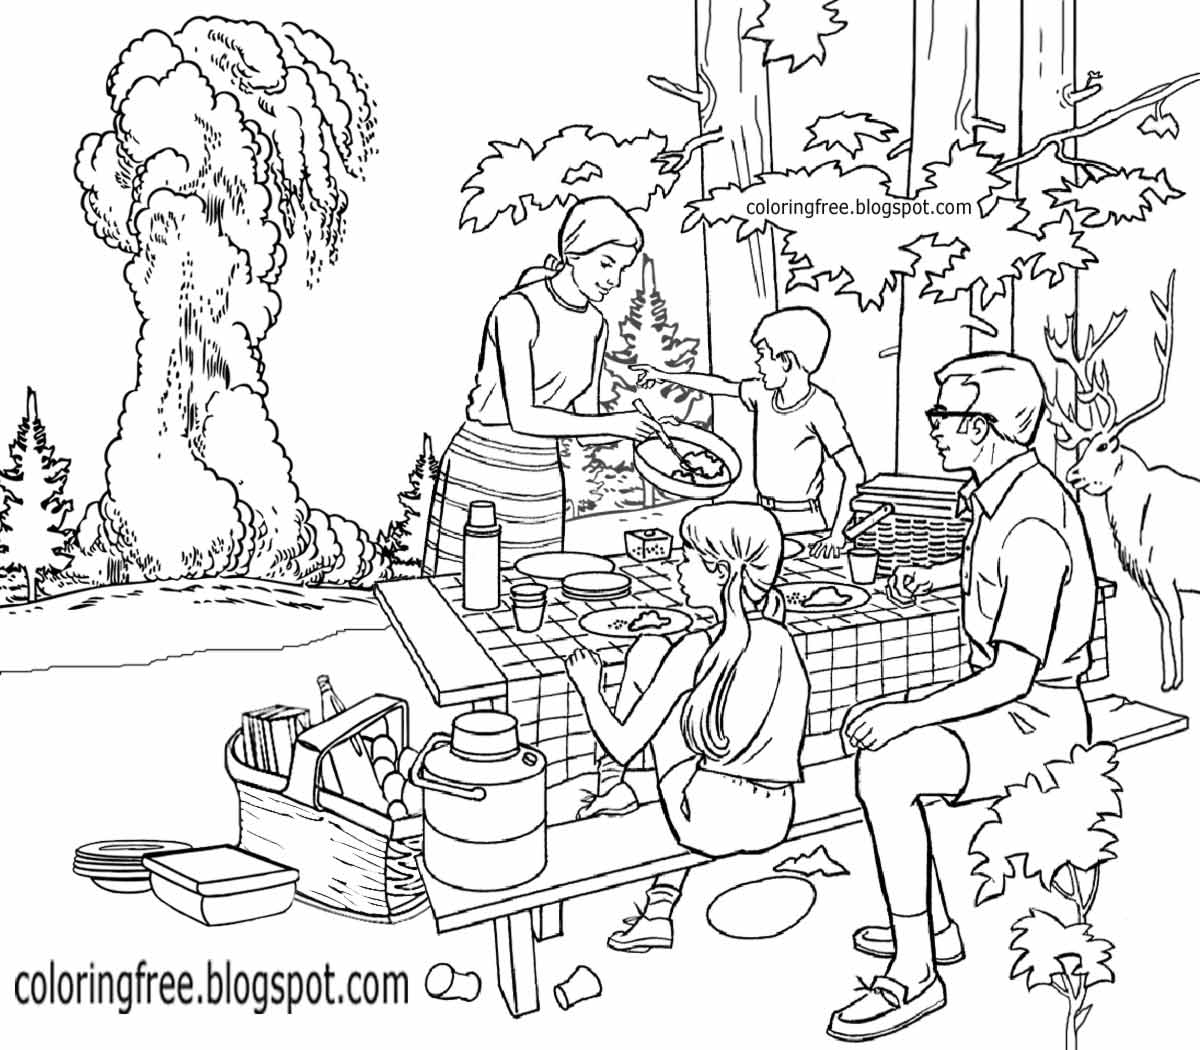 5TH Grade Yellowstone scene picnic coloring pages big American park kids drawing old faithful geyser